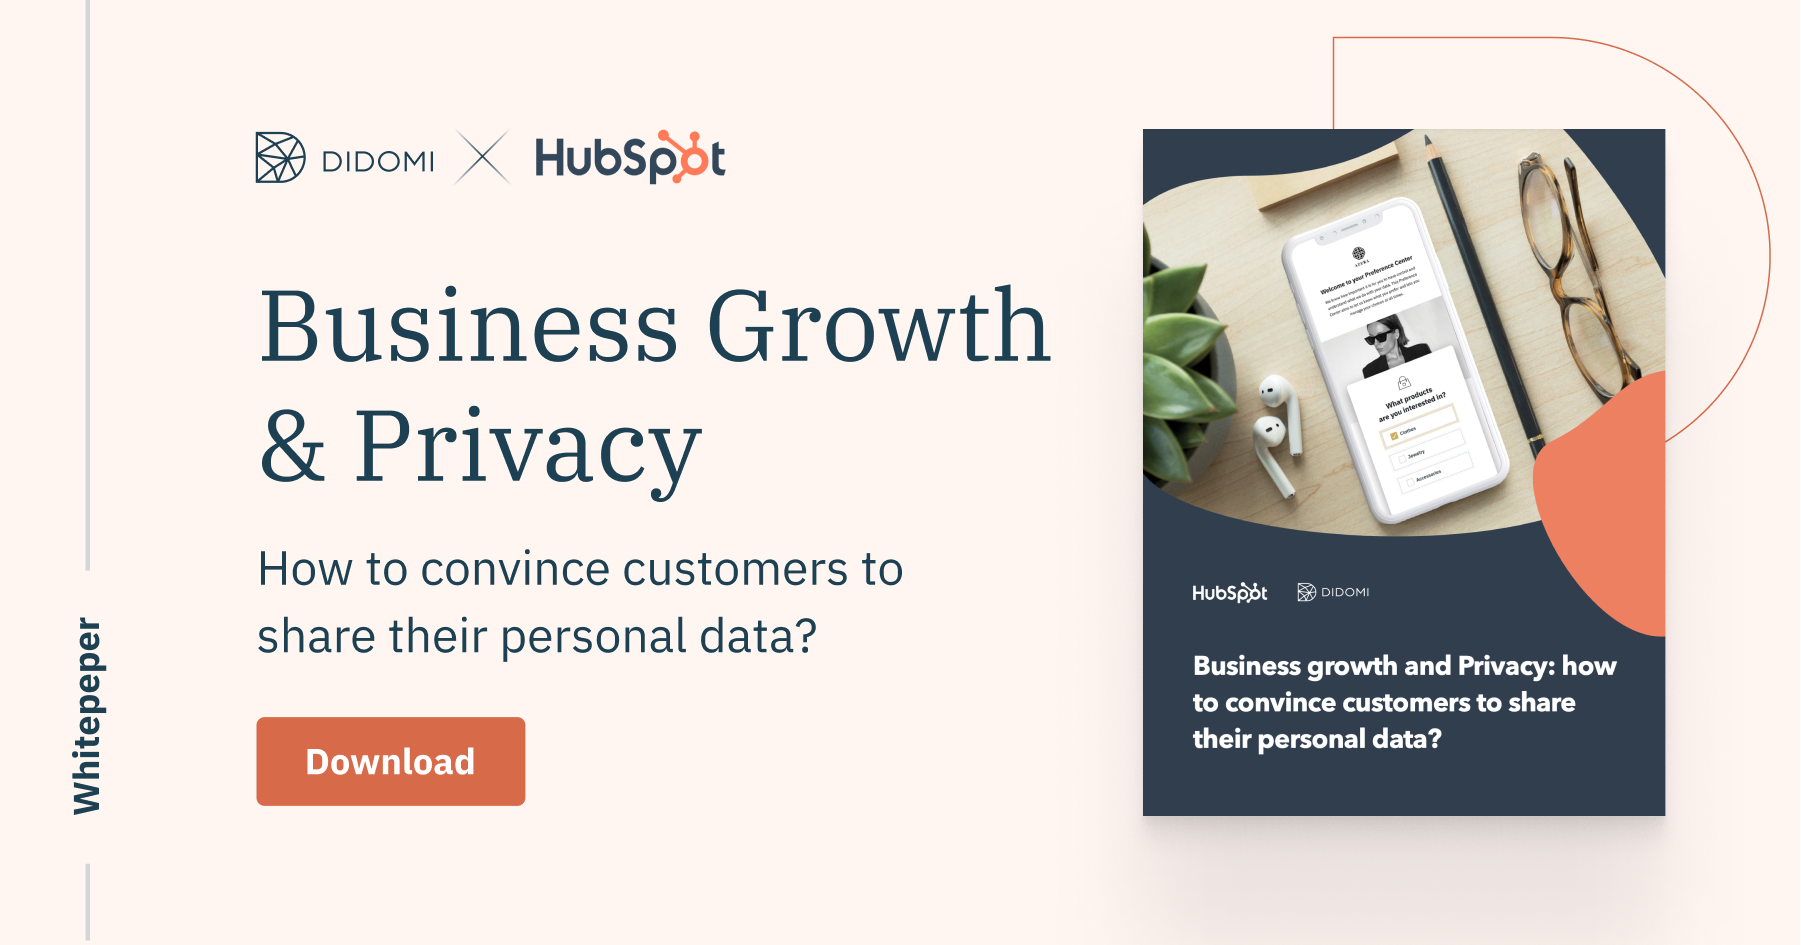 Didomi and Hubspot - Business Growth and Privacy whitepaper